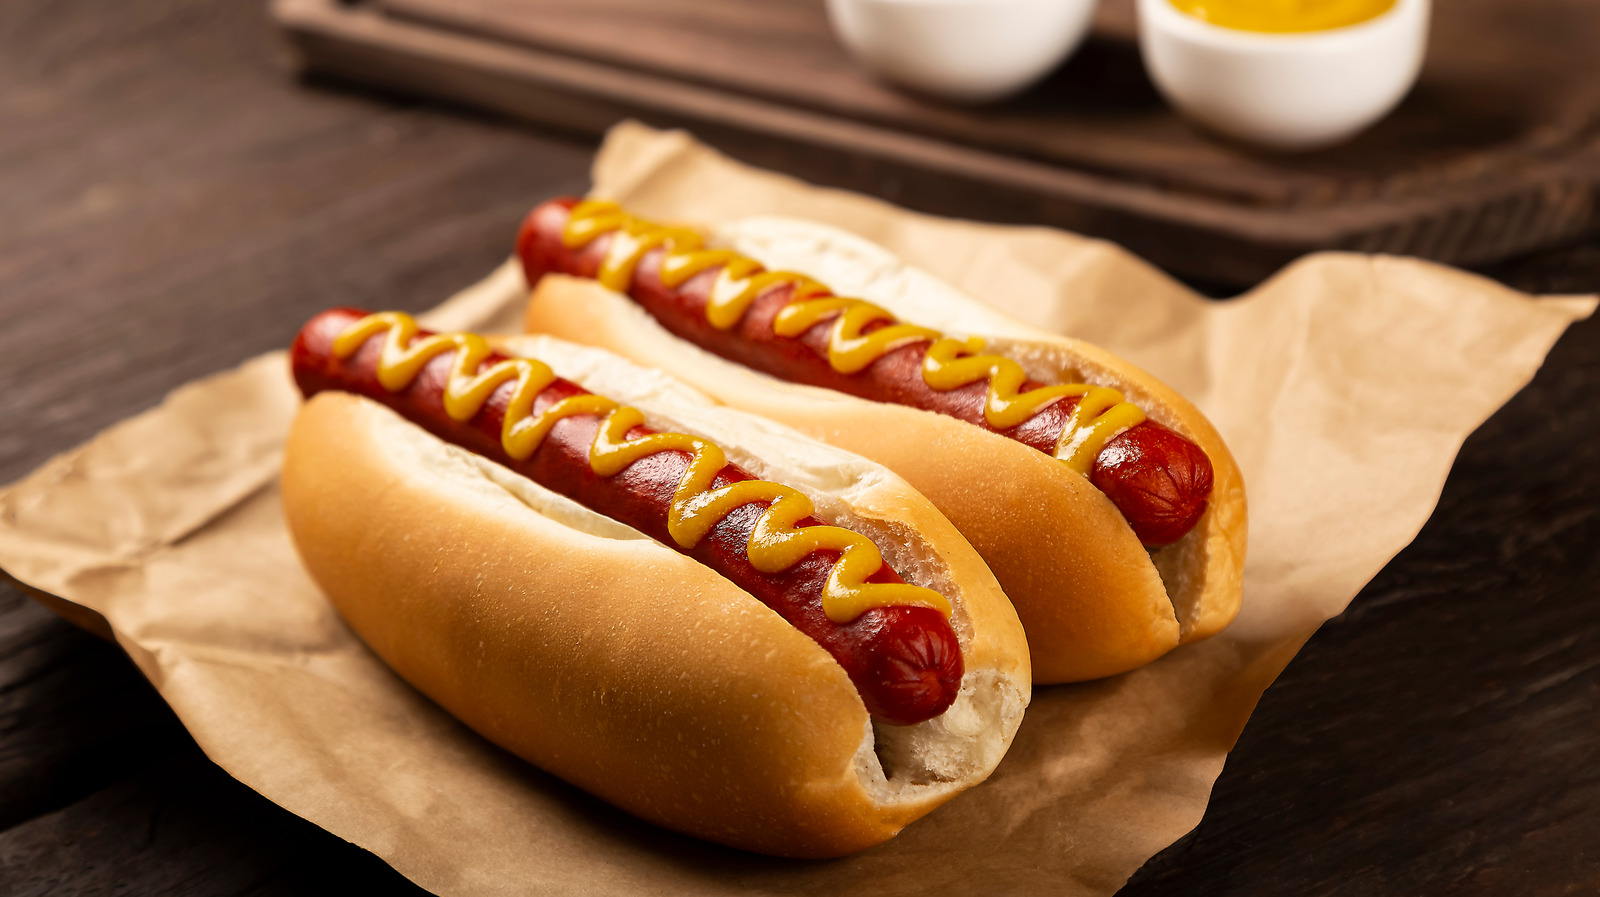 How Long Does It Take To Grill Hot Dogs?